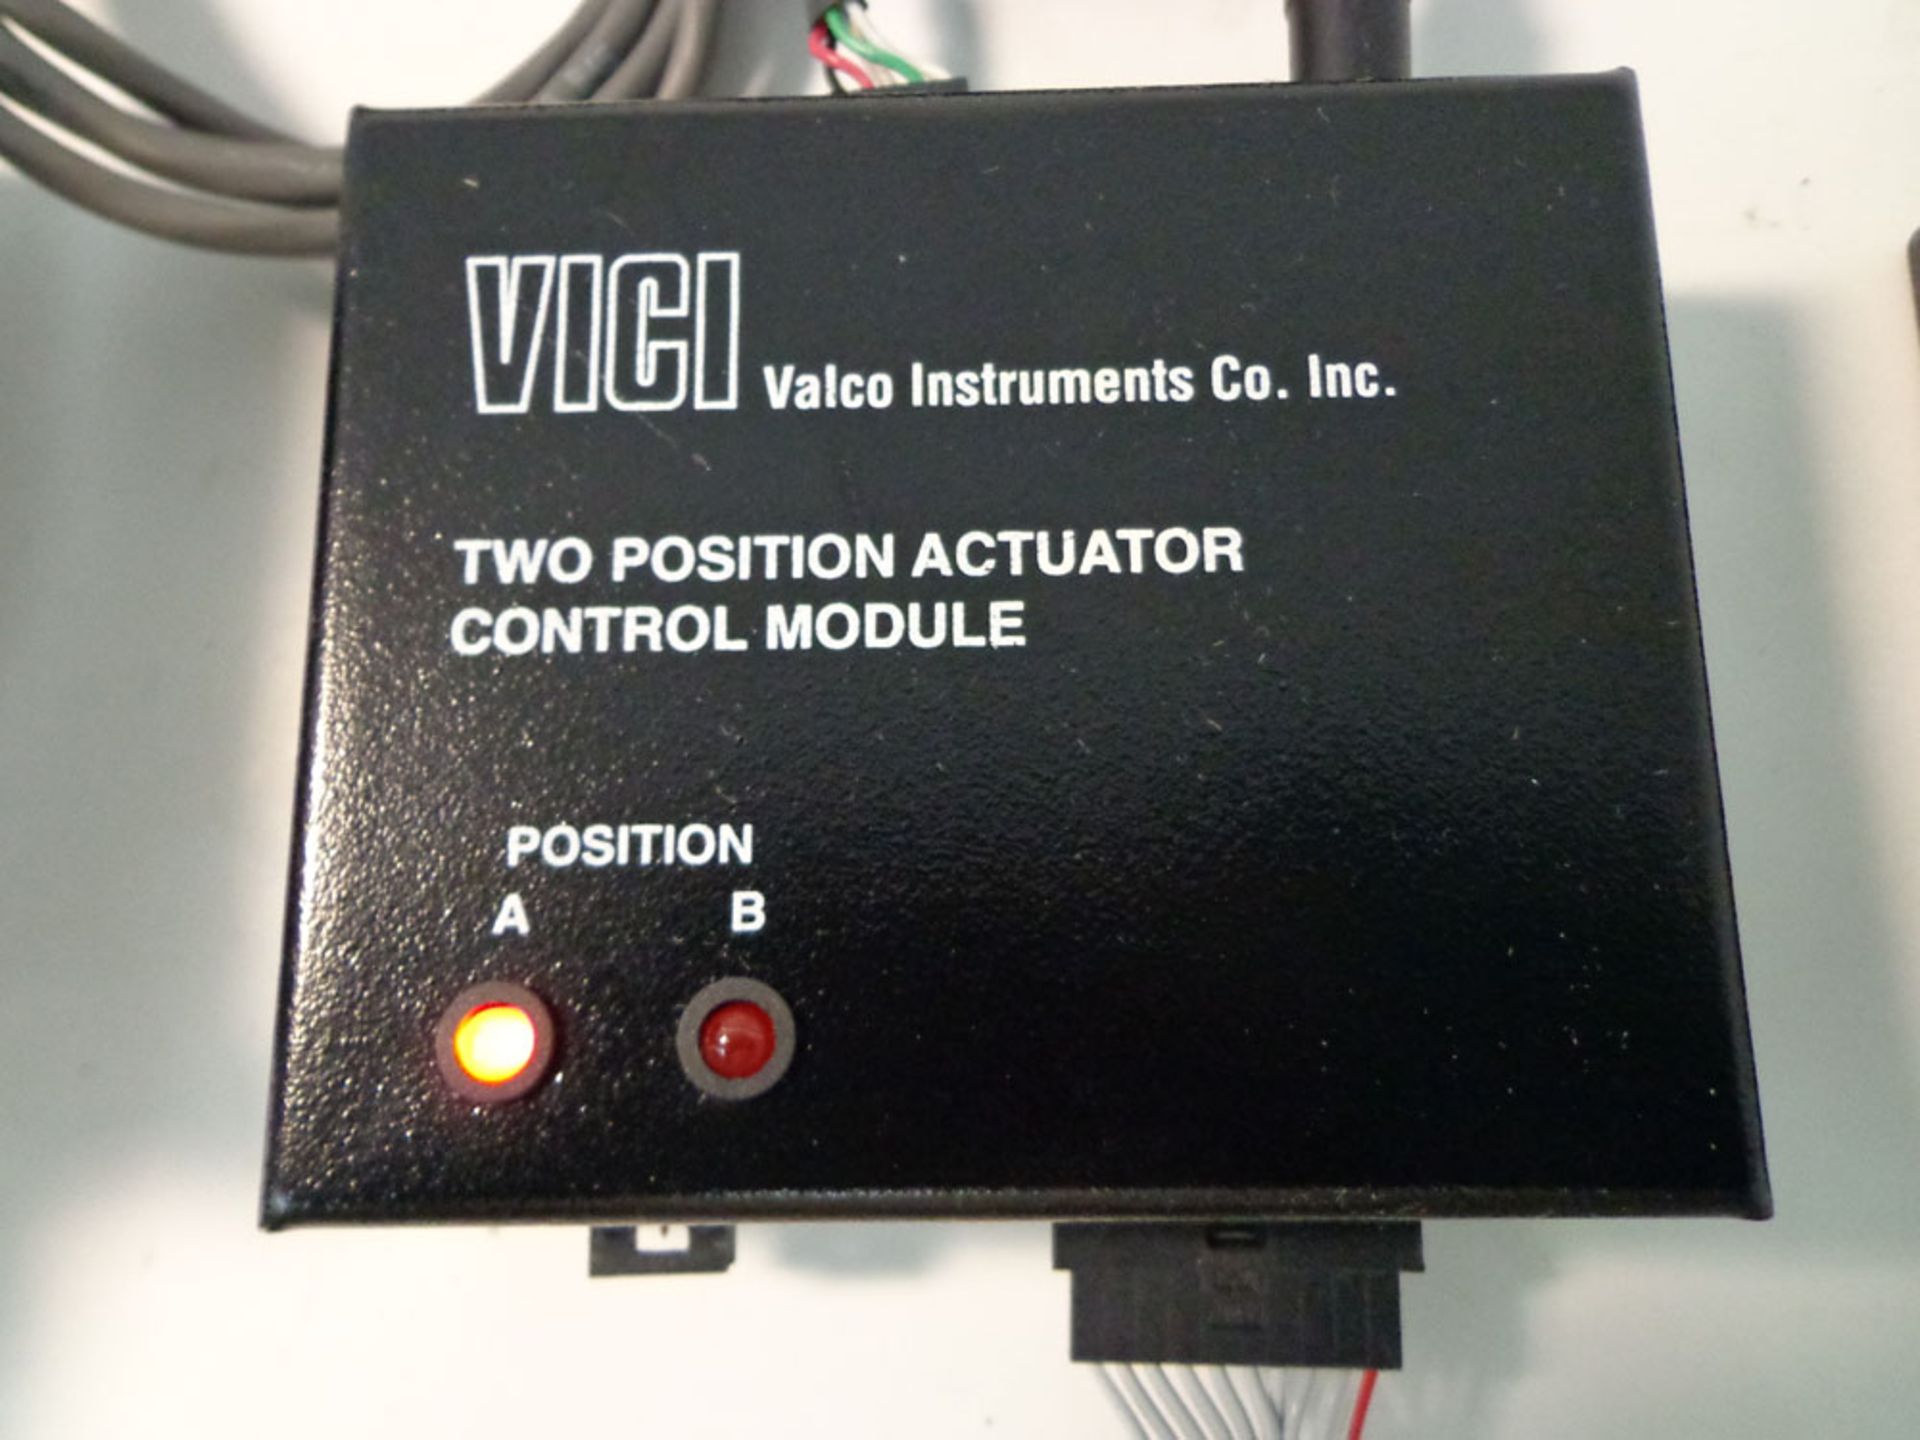 Vici Valco Instruments Modular Universal Valve/Actuator, Model EHMA, with Two Position Actuator - Image 7 of 8